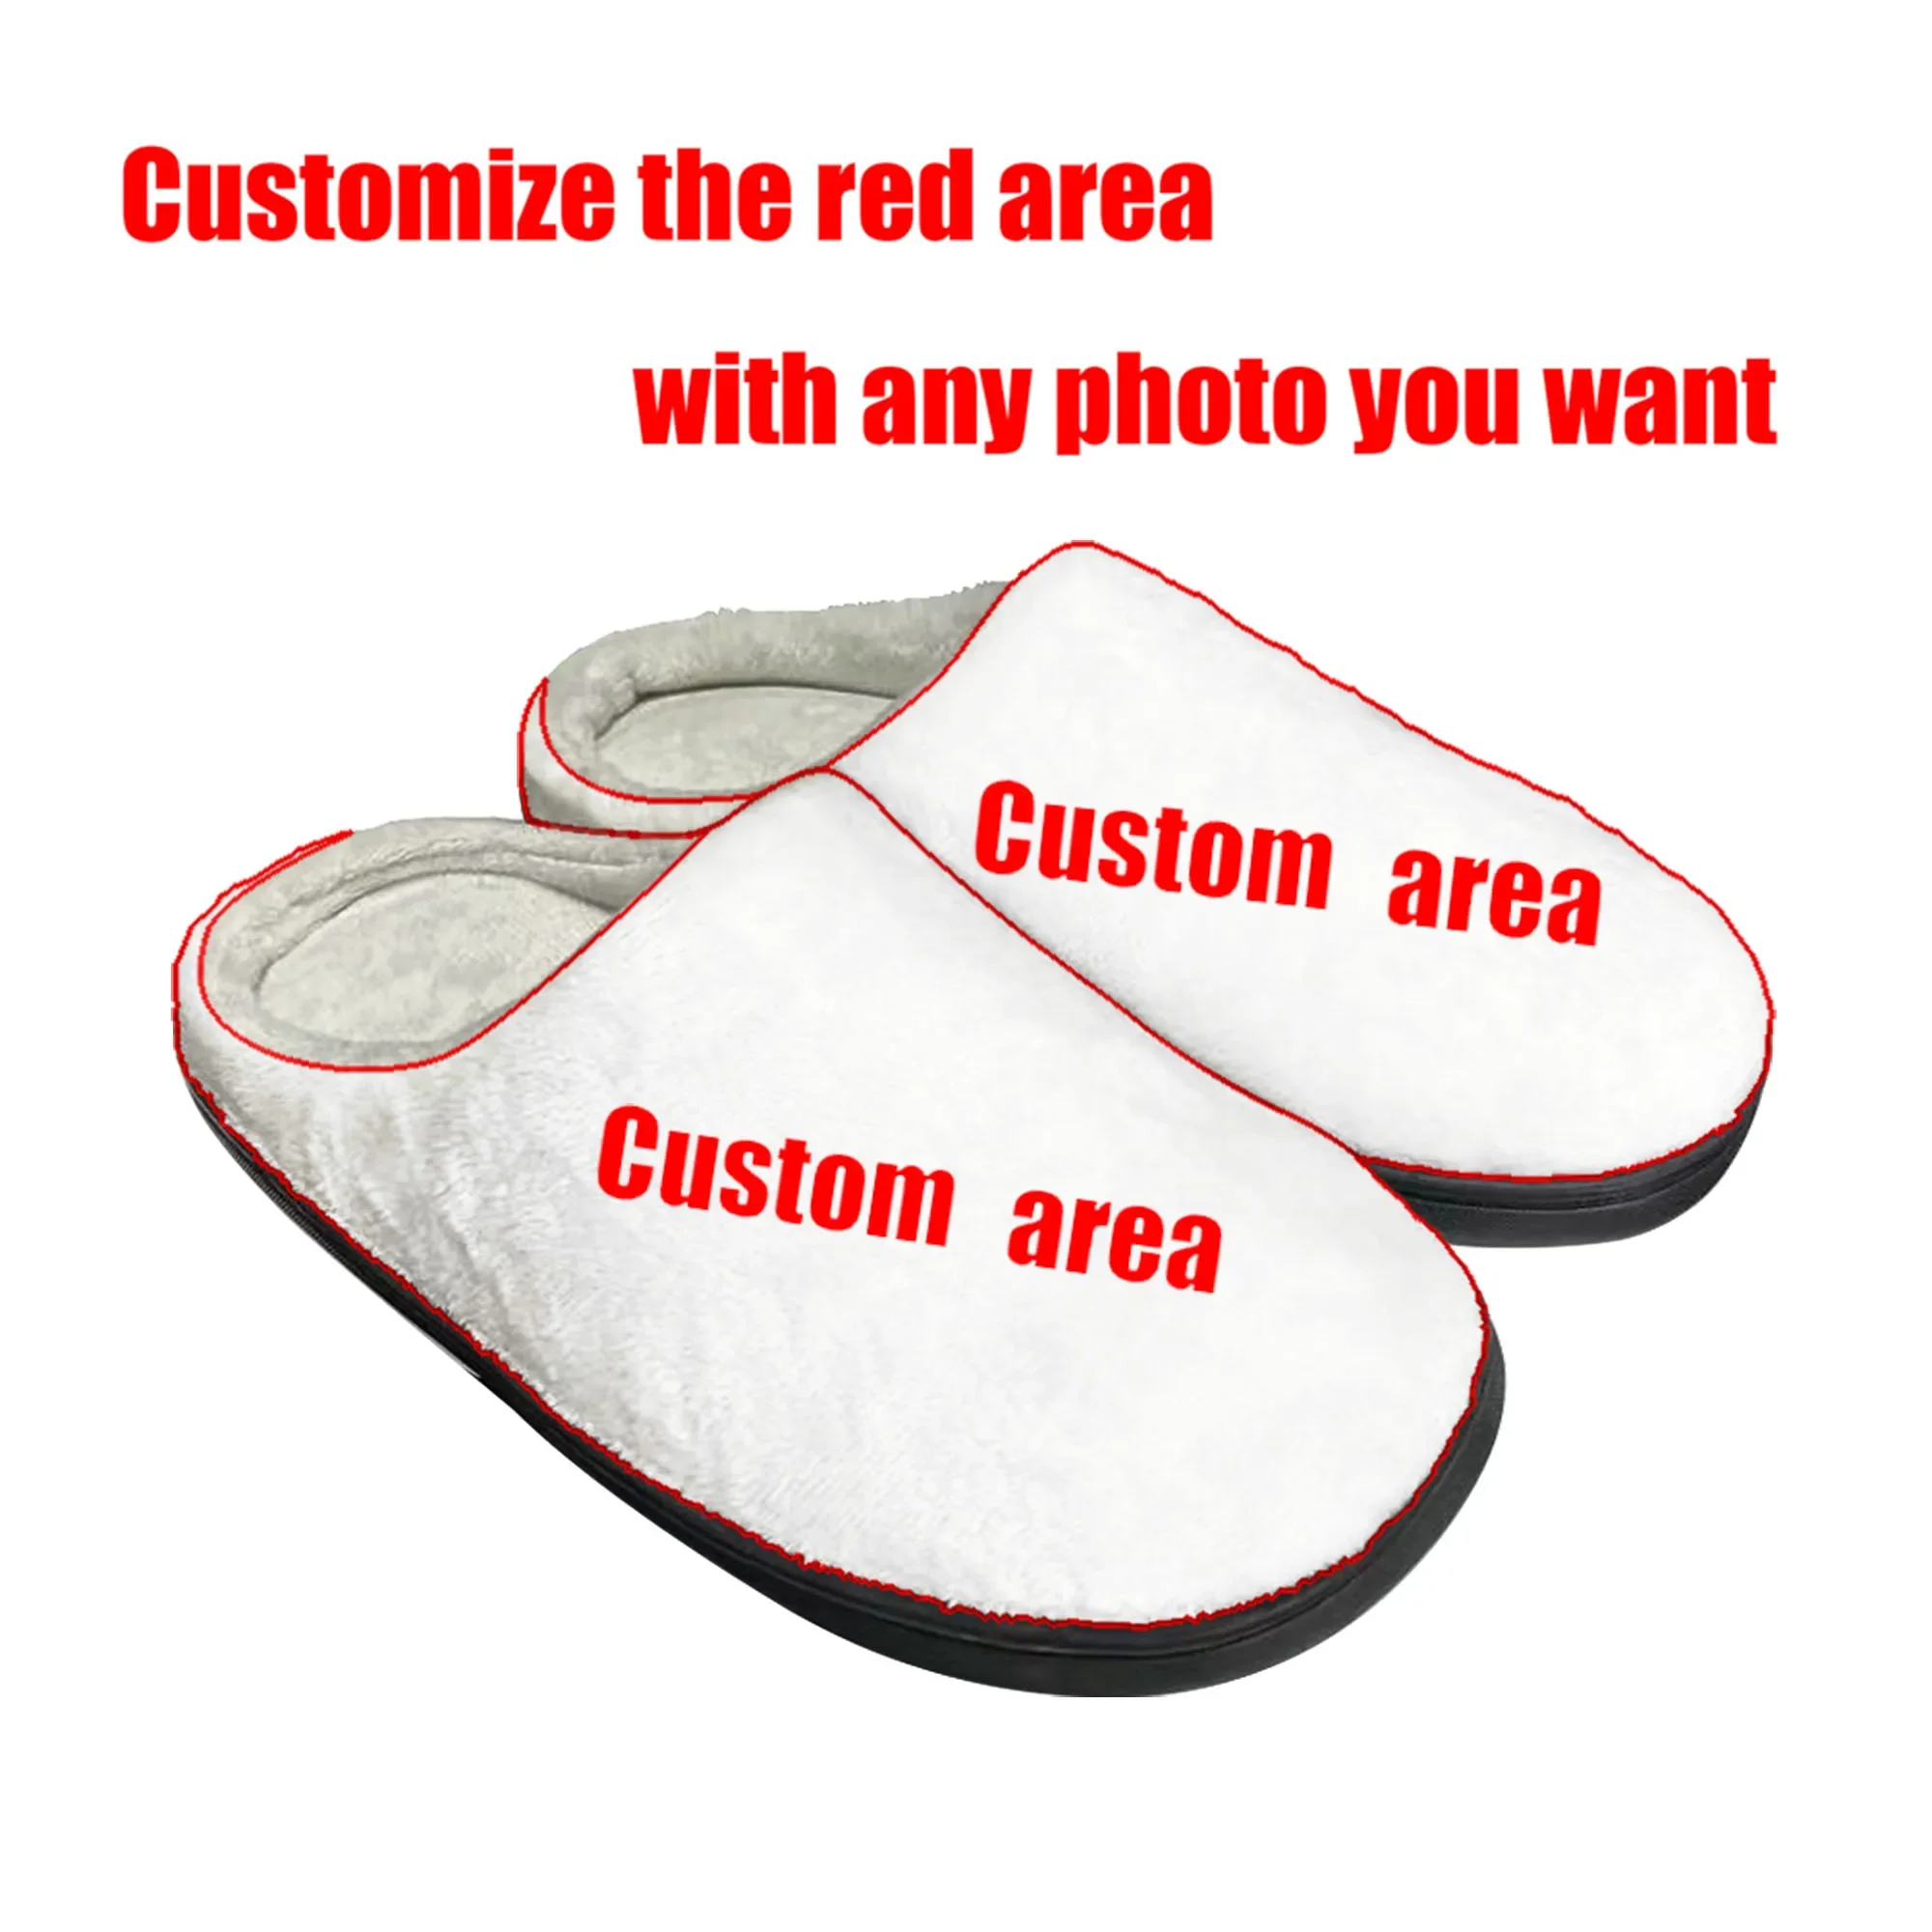 

Bespoke Slippers Home Cotton High Quality Shoe Mens Womens Youth Boy Girl Keep Warm Shoe Customize Plush Bedroom Thermal Slipper